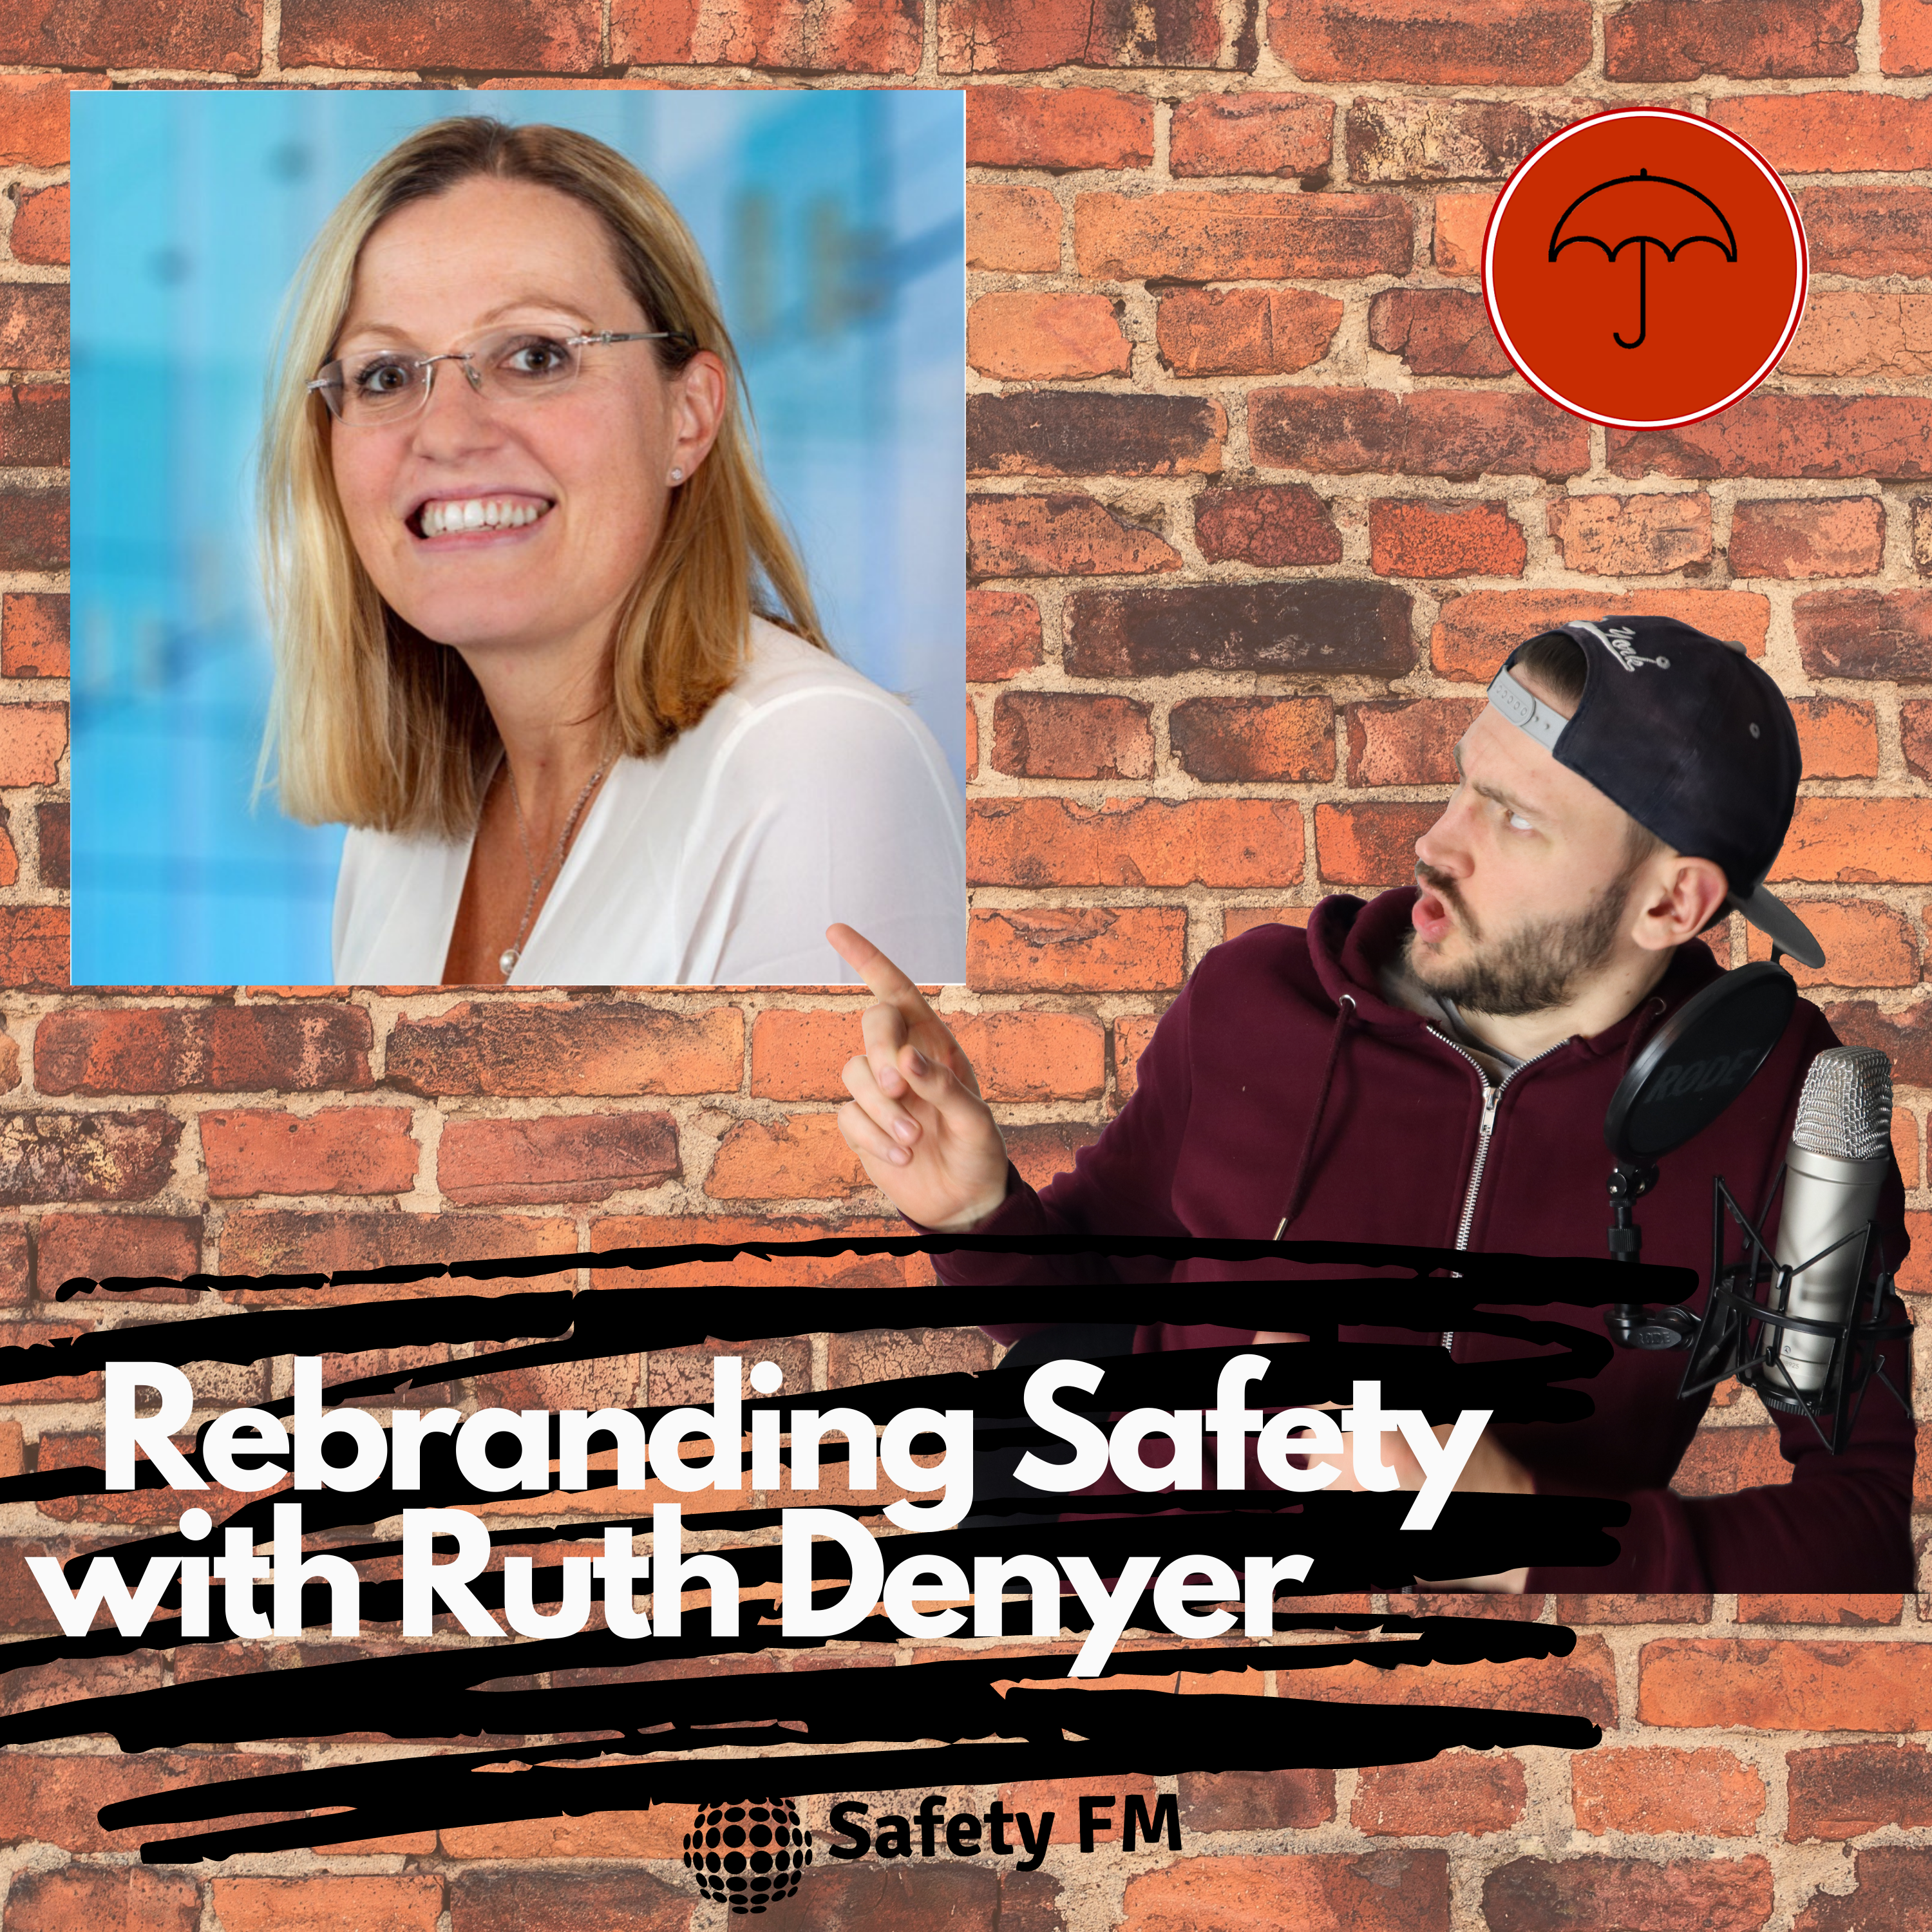 Rebranding Safety with Ruth Denyer